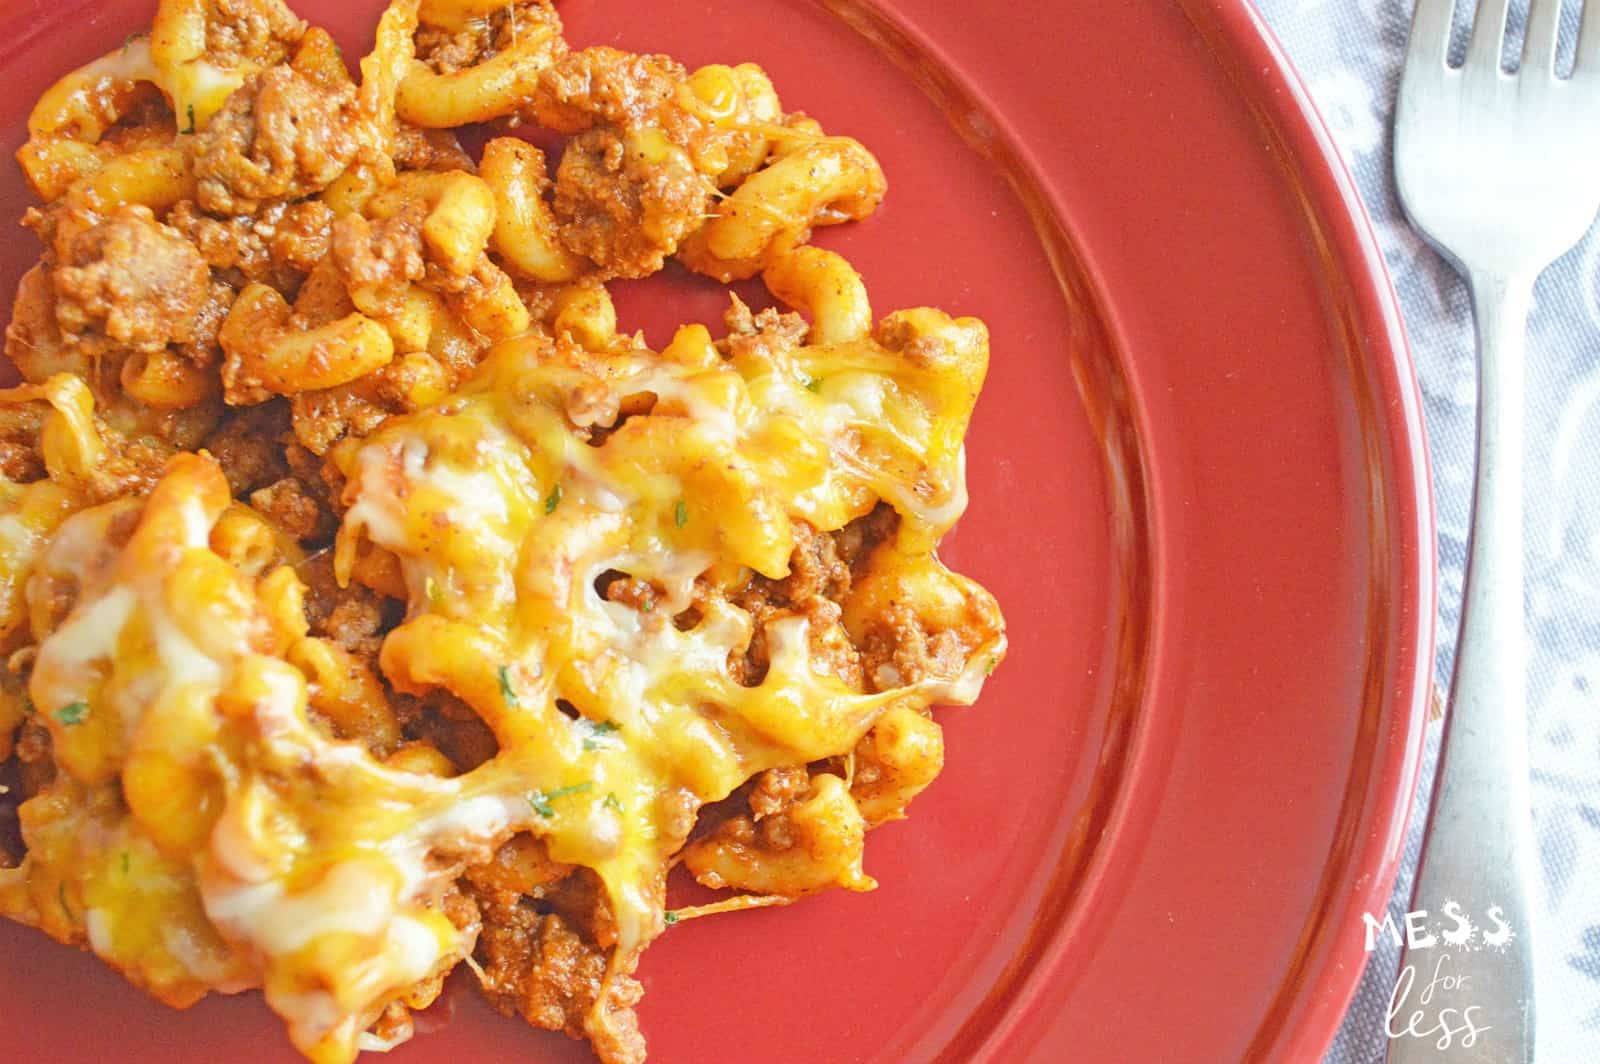 chili mac and cheese on a plate